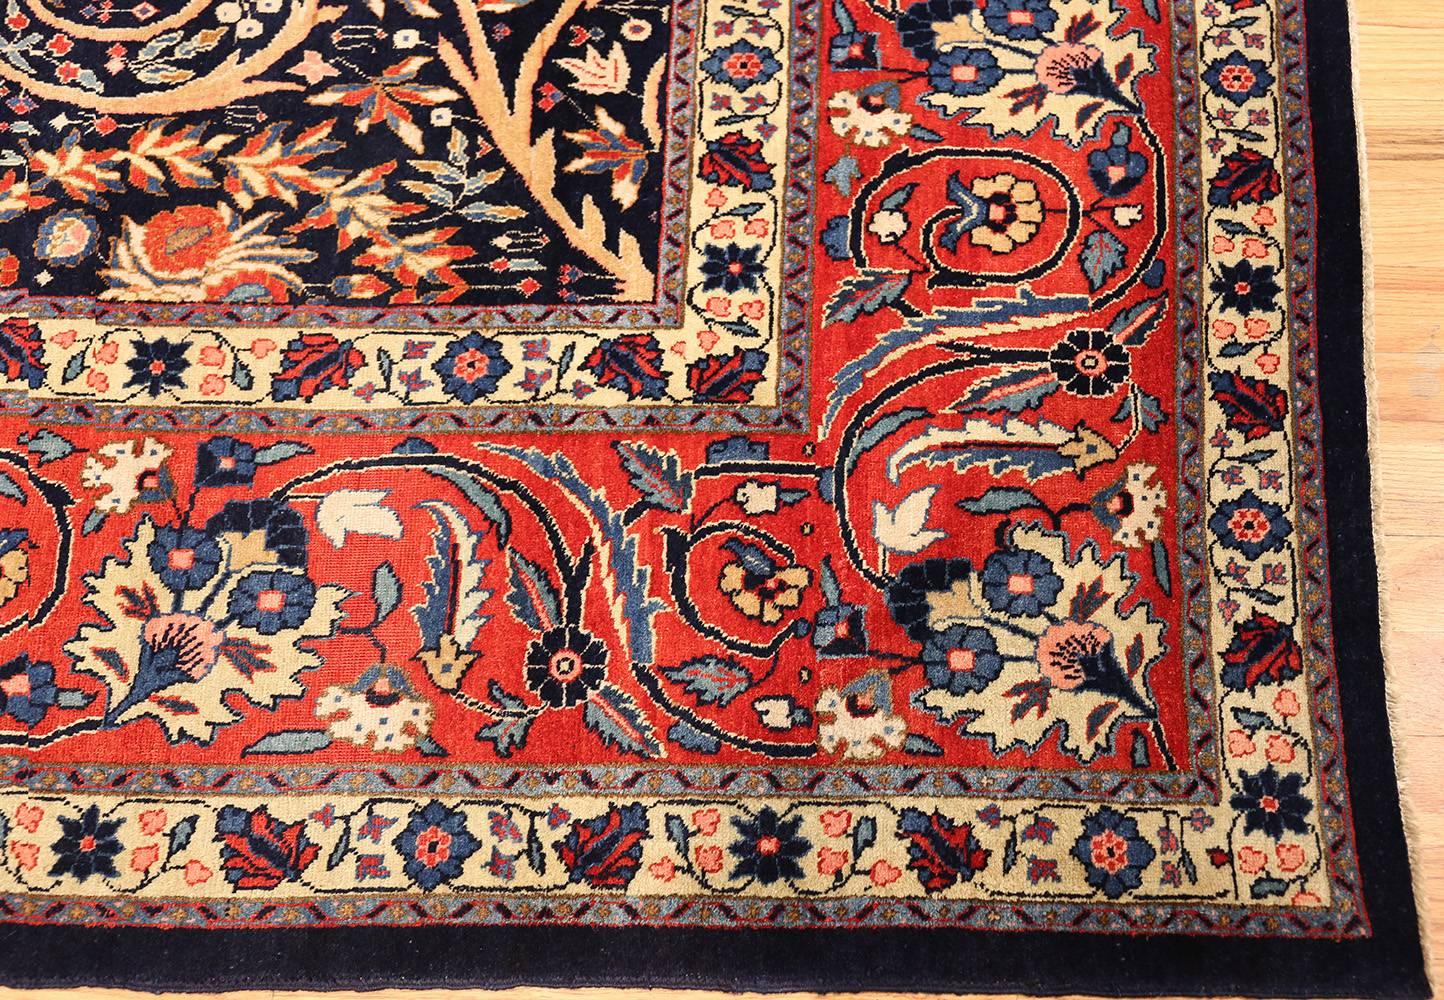 Antique Tabriz Carpet, Origin: Persia, Circa 1920. Size: 11 ft x 14 ft 3 in (3.35 m x 4.34 m)

Where many traditional Persian carpets would apply brighter, more fiery colors throughout, this ones allows the contrast between the dark and light hues